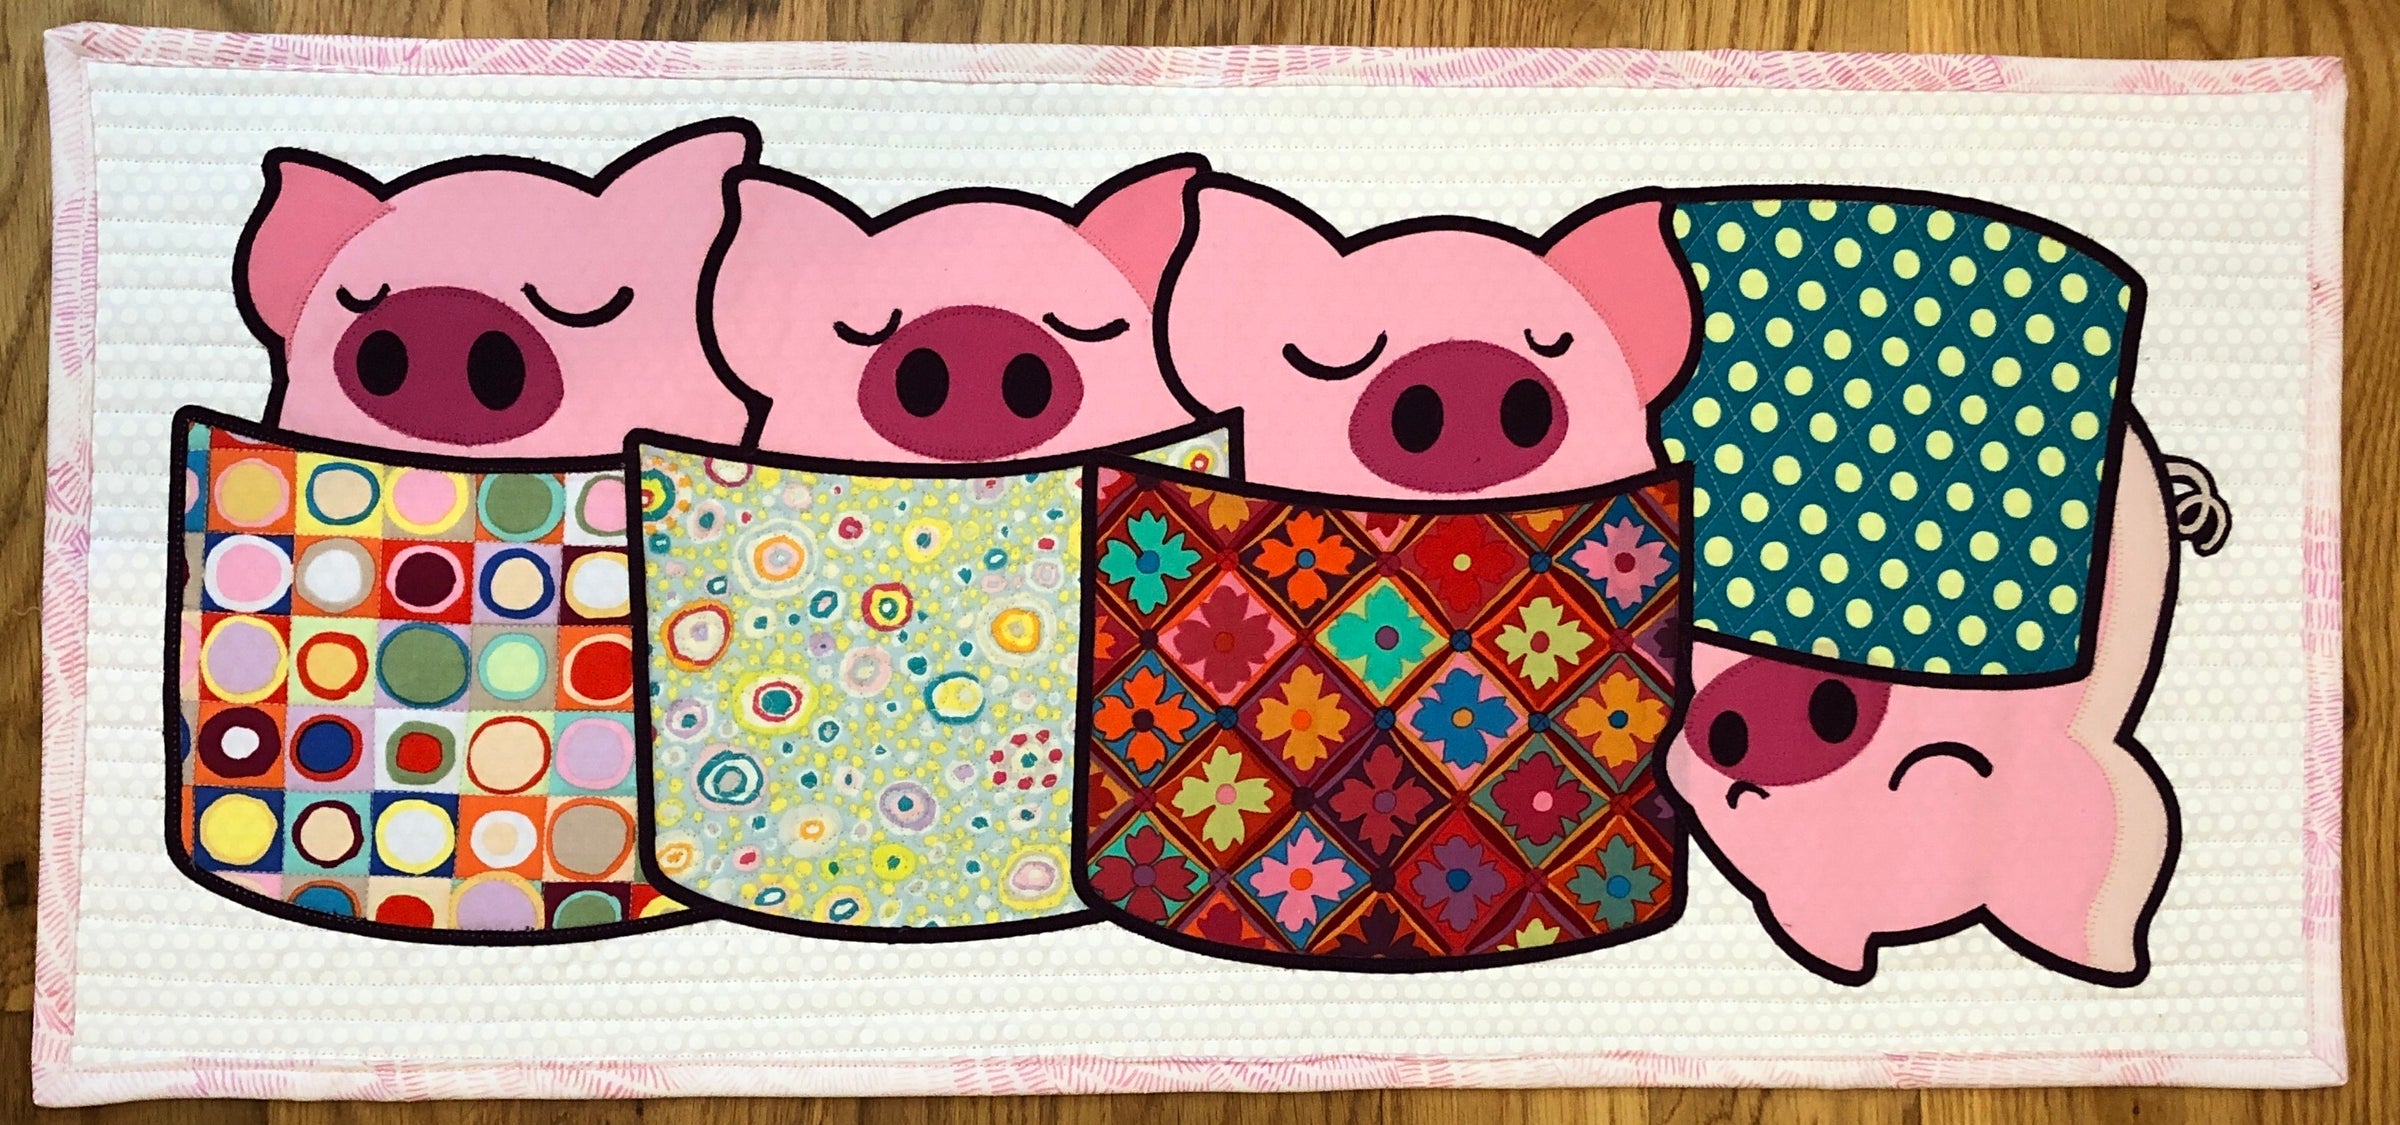 2019 Digital Download Pattern Only: Pigs in Blankets, Row by Row Experience 2019